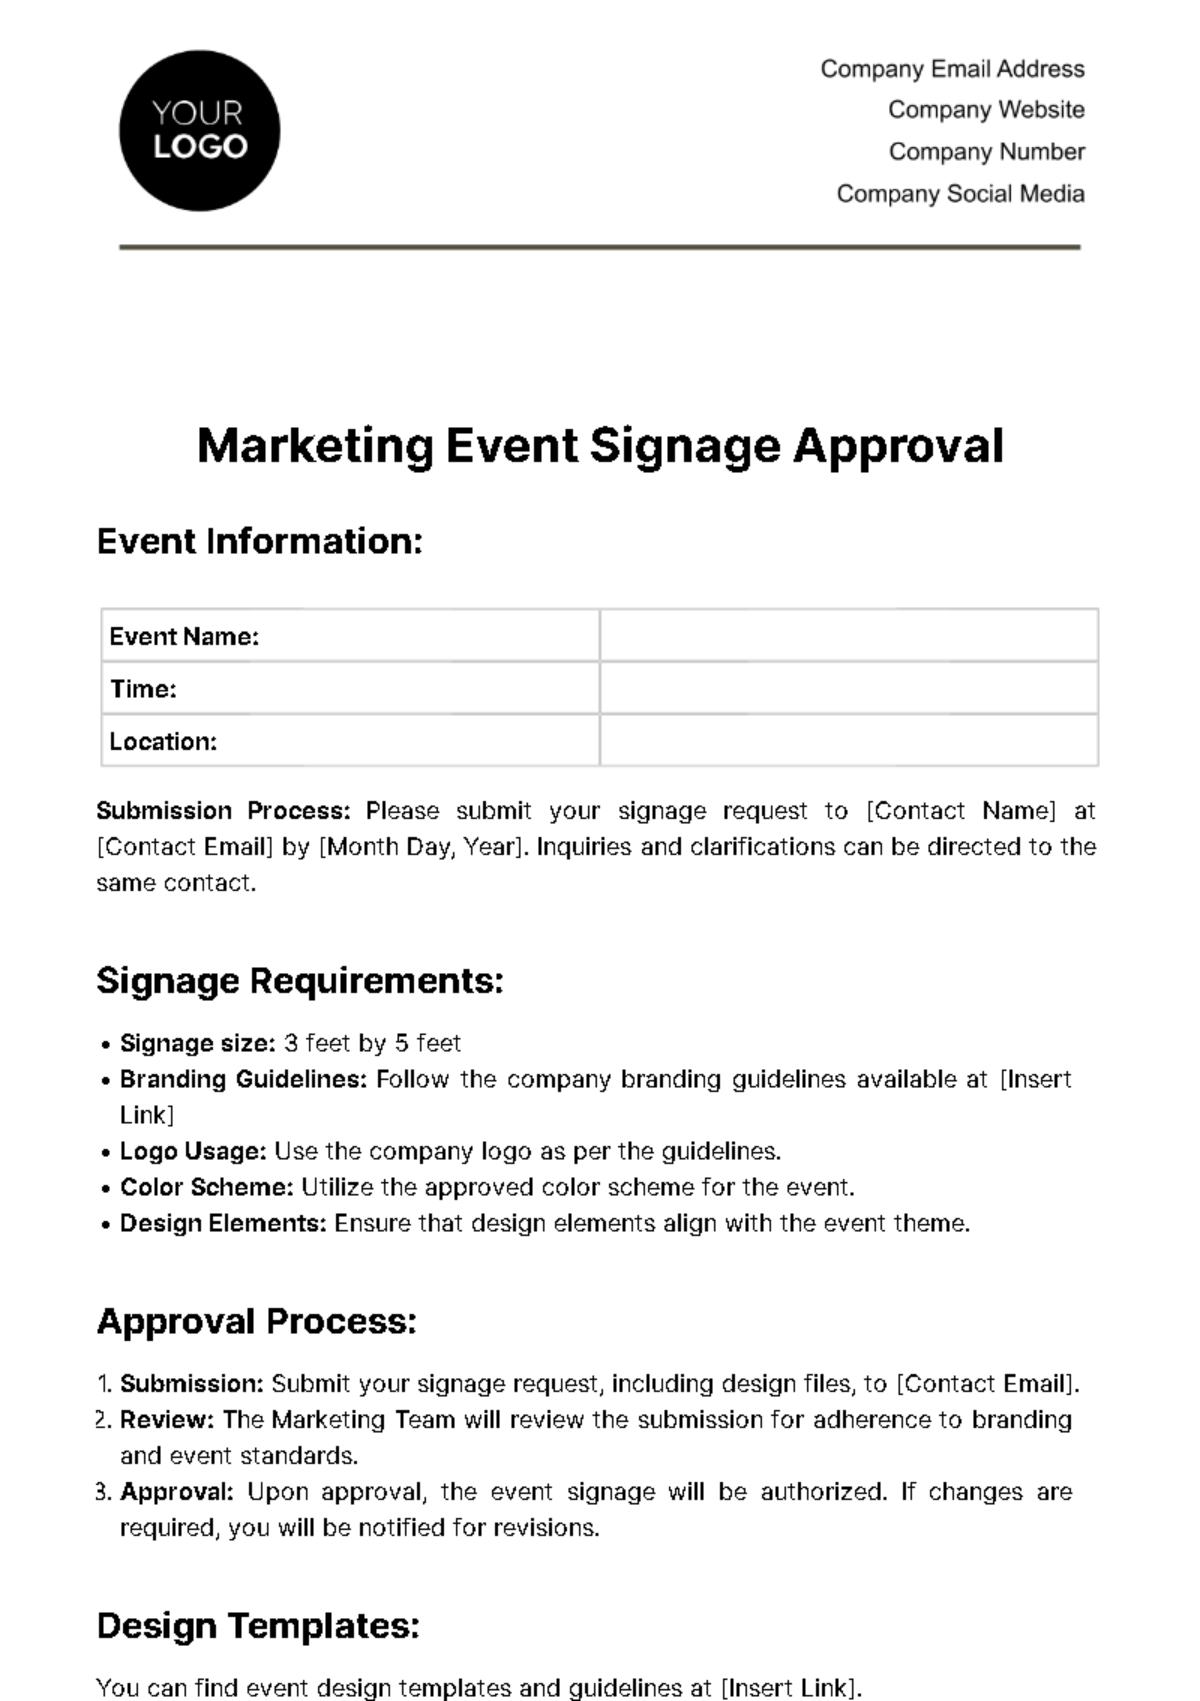 Free Marketing Event Signage Approval Document Template